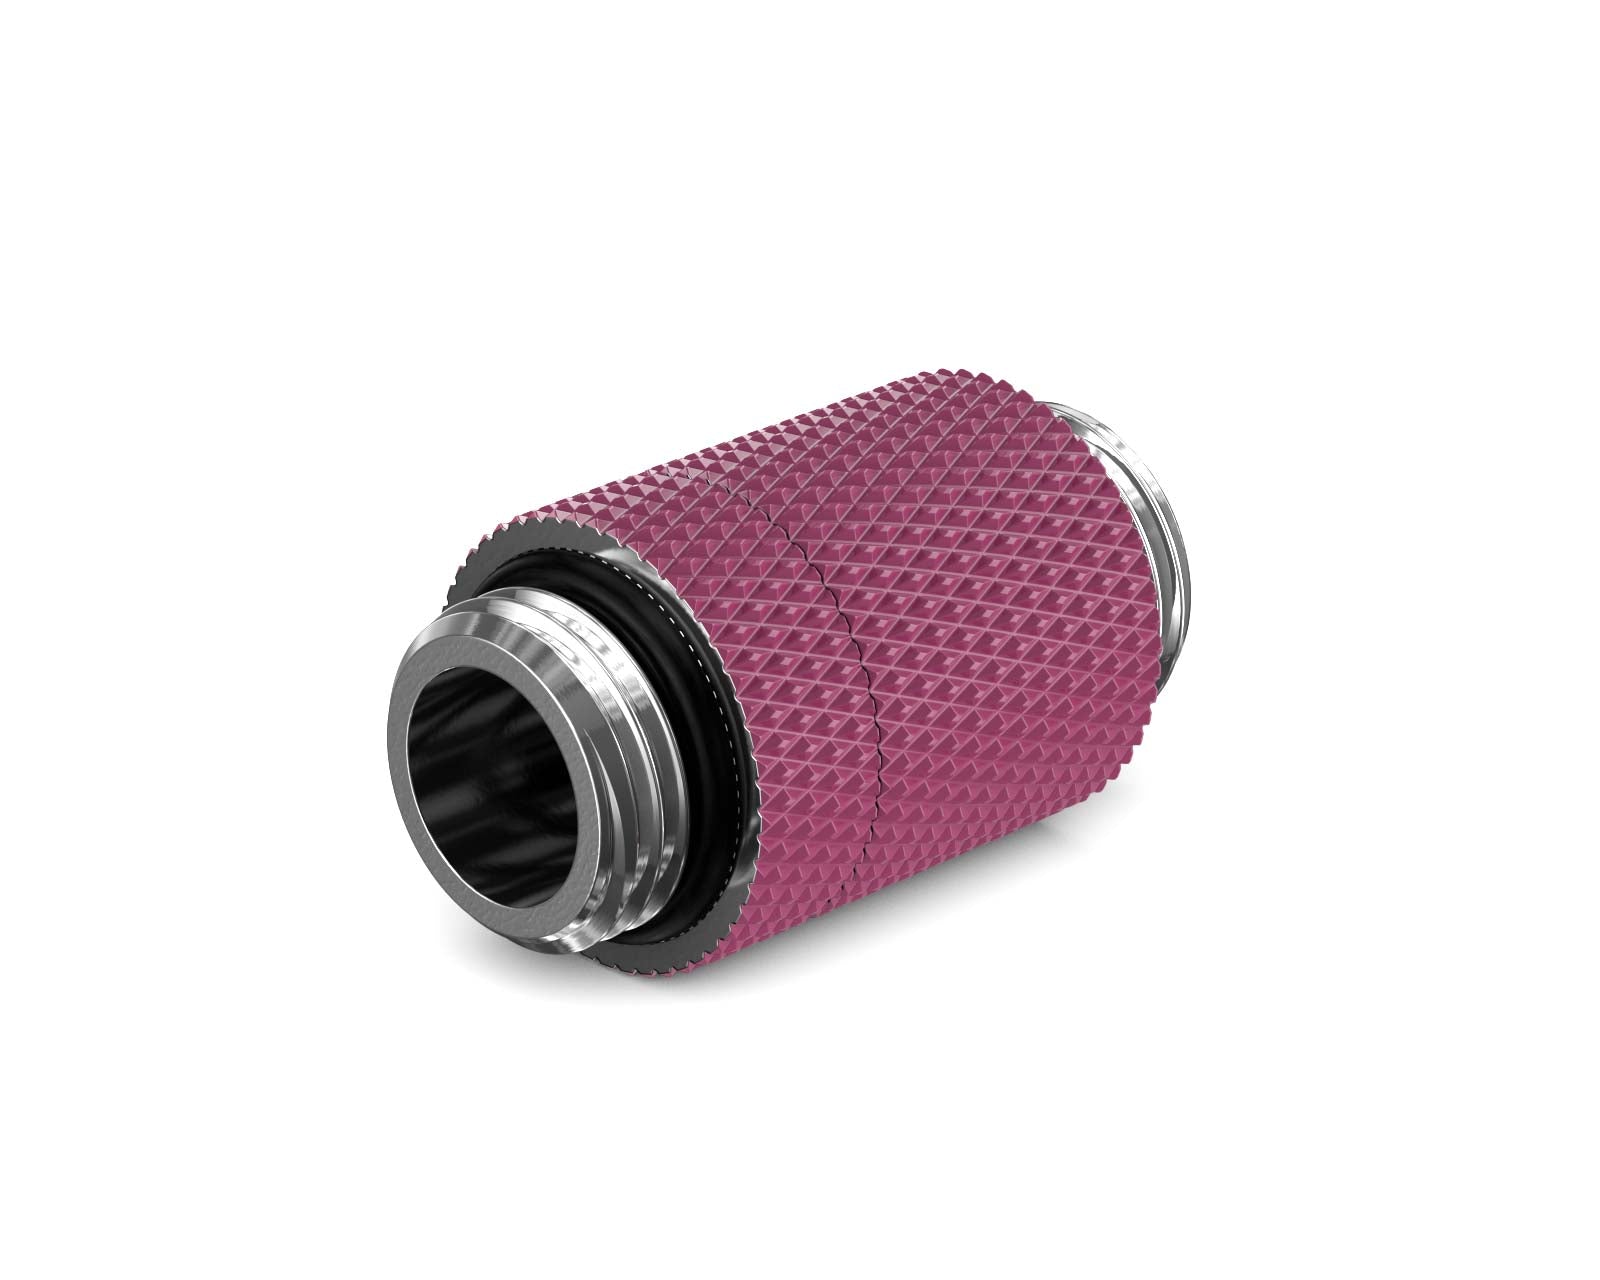 PrimoChill Dual Male G 1/4in. SX Rotary Extension Coupler - PrimoChill - KEEPING IT COOL Magenta